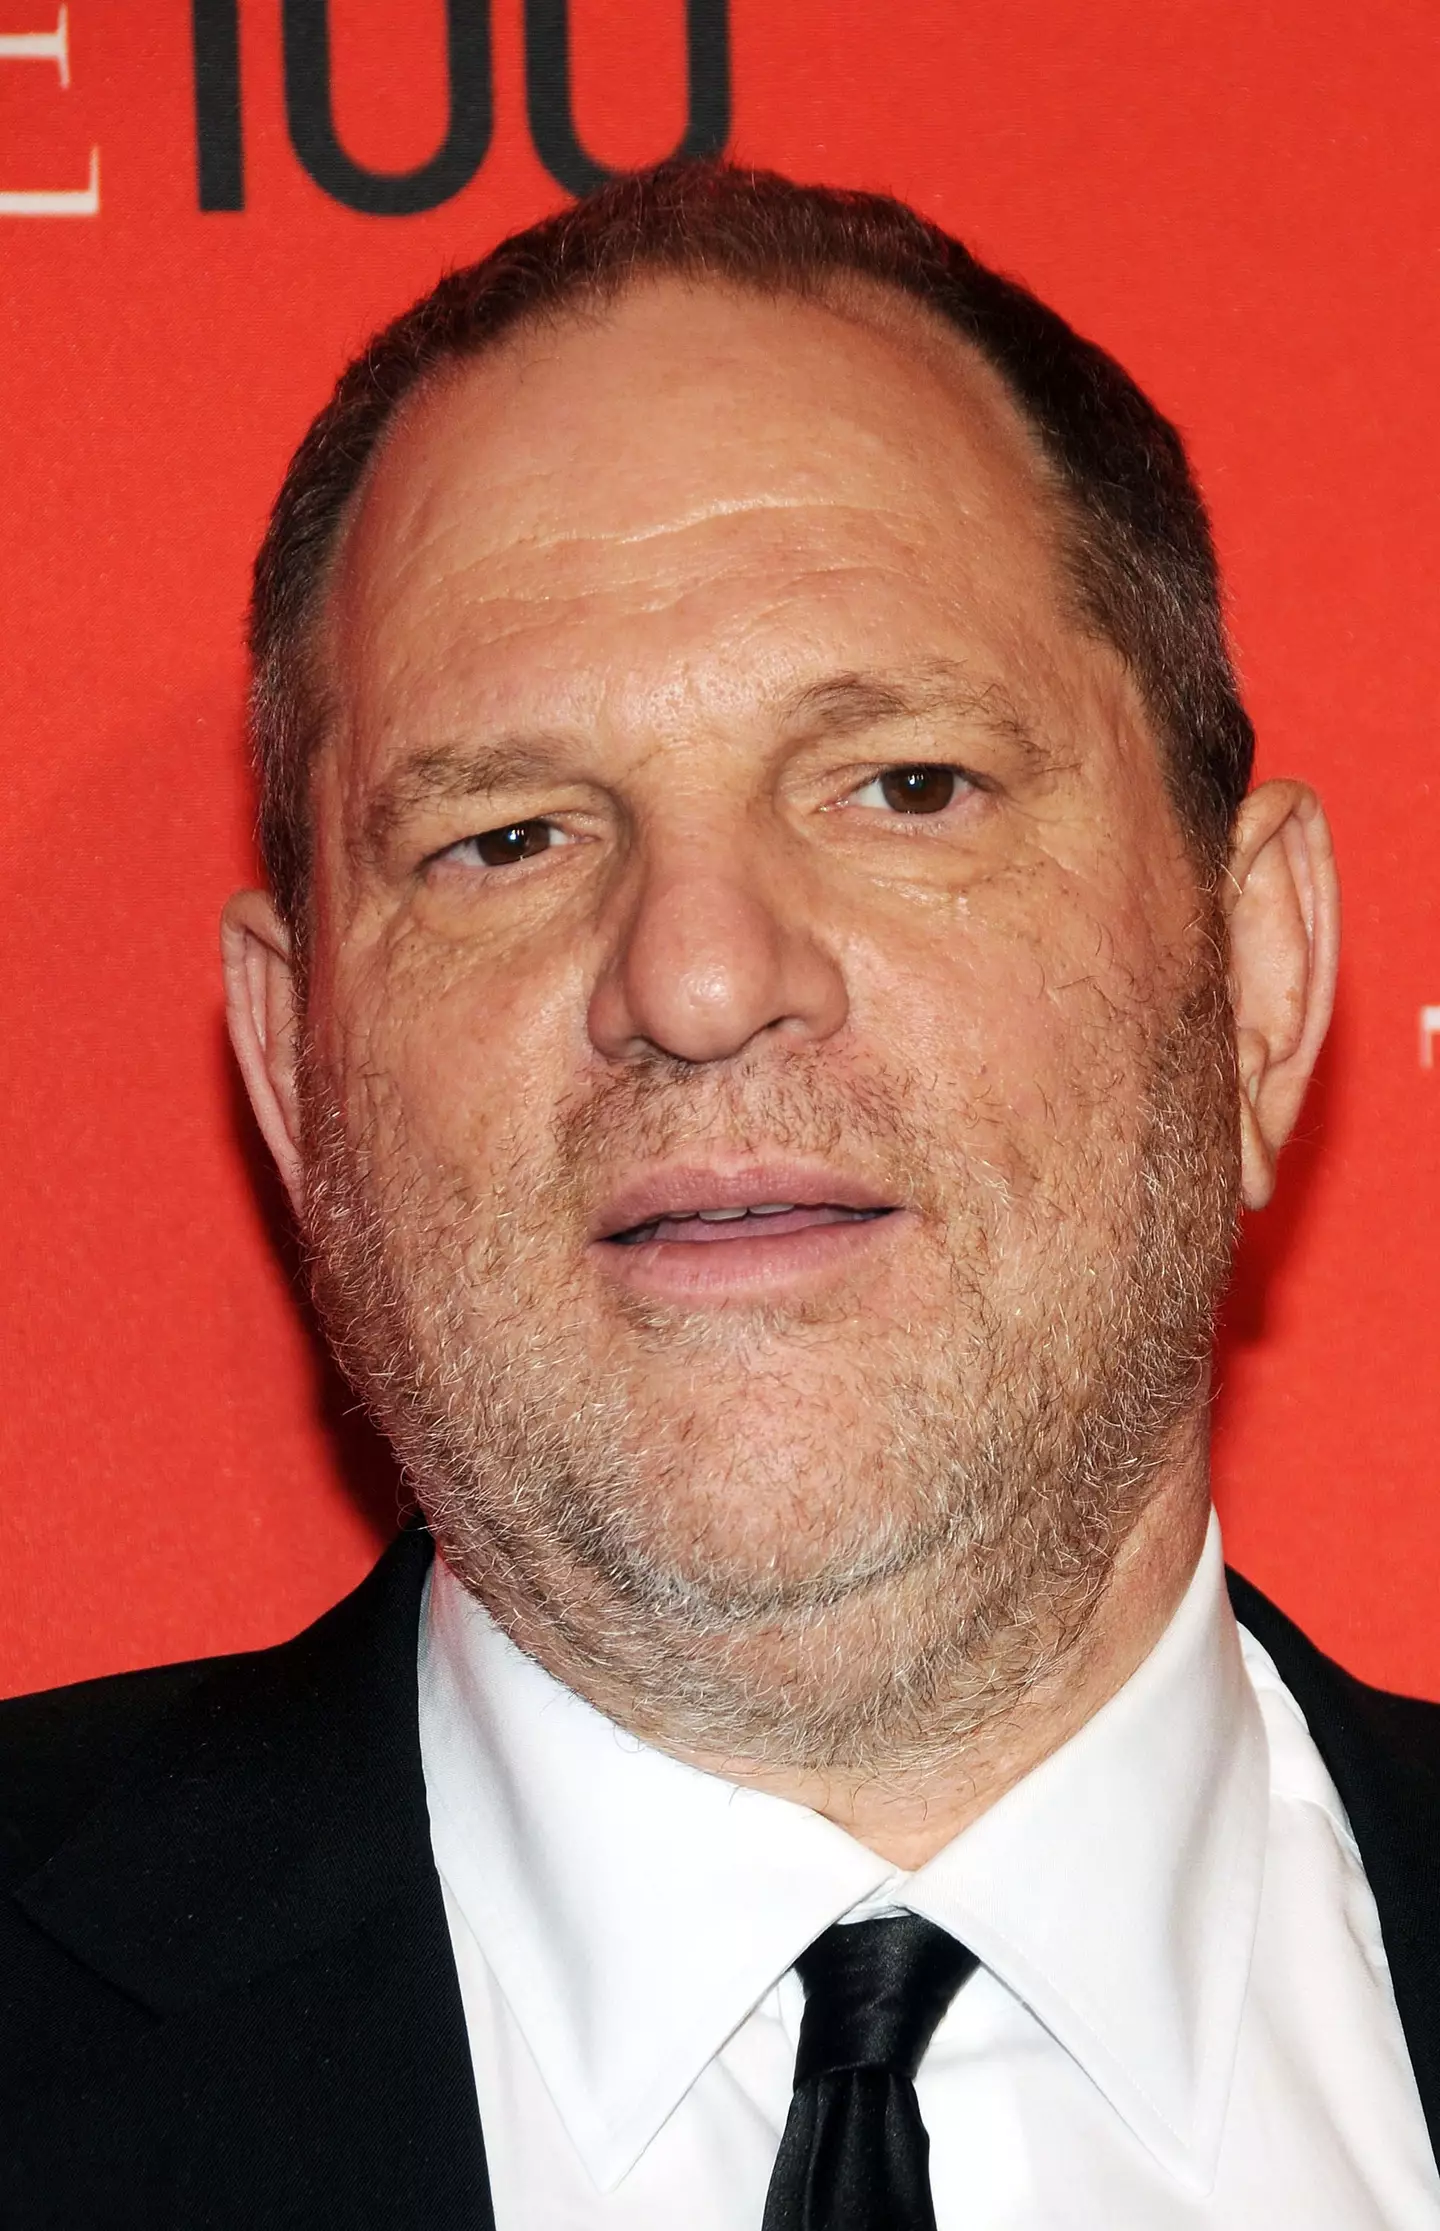 Weinstein was 50 at the time.